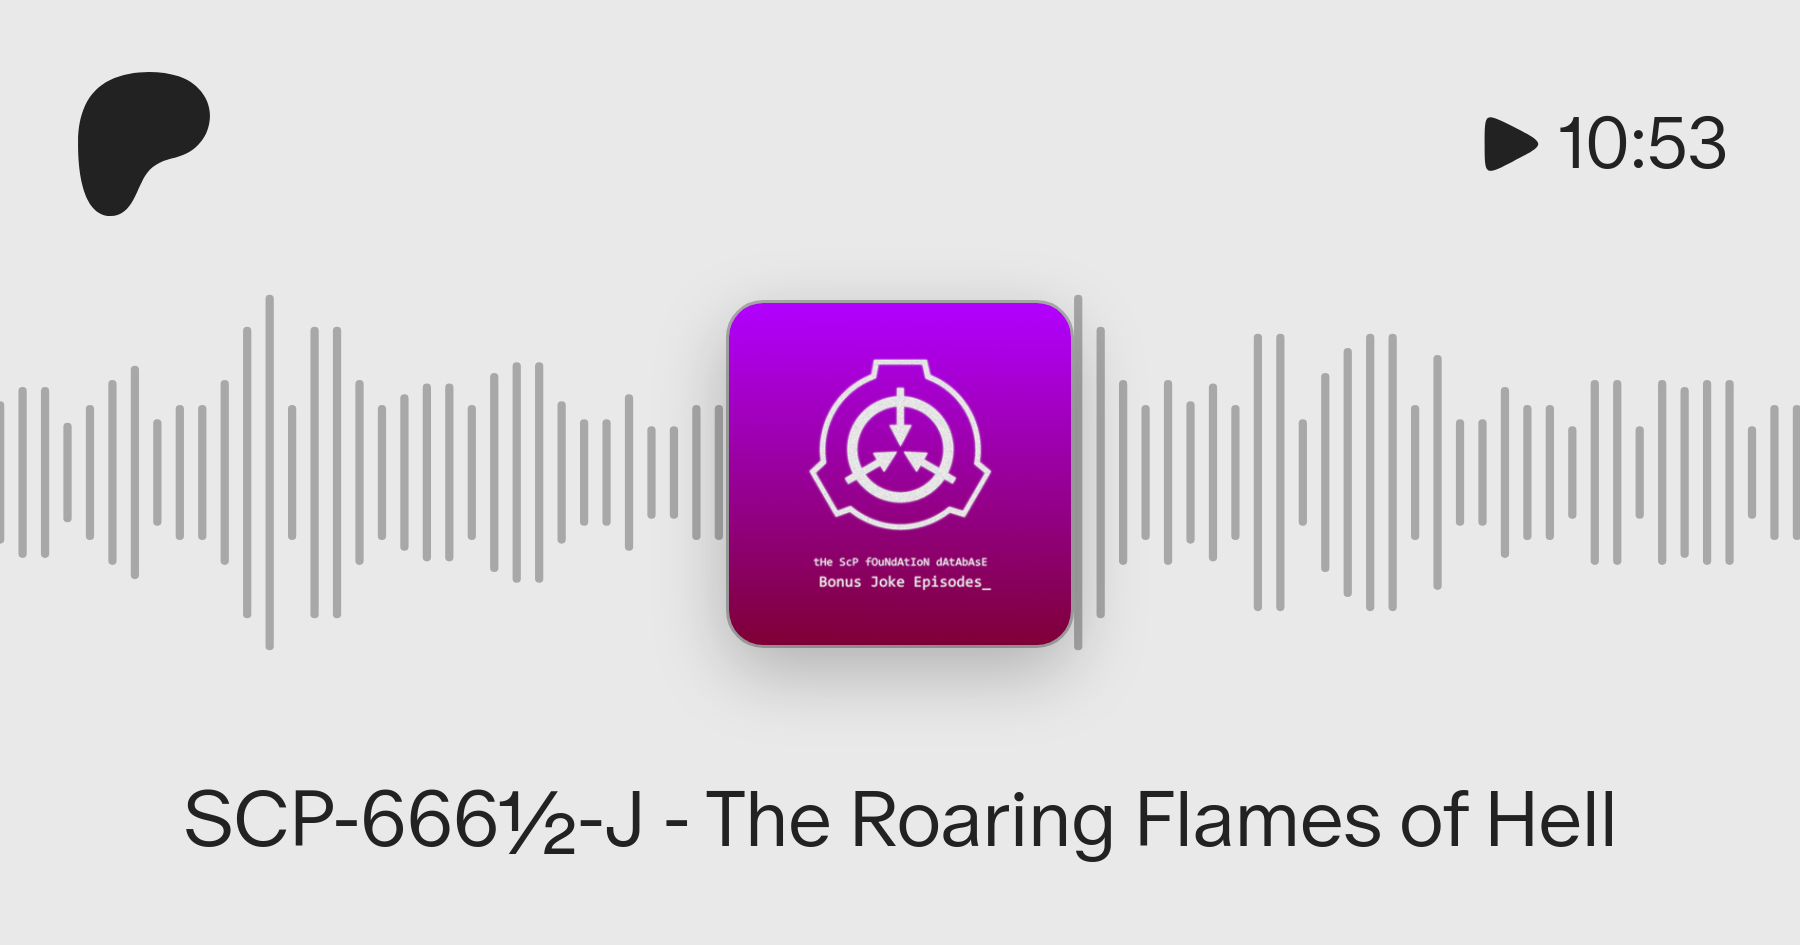 SCP-666½-J - The Roaring Flames of Hell, The SCP Foundation Database, Podcasts on Audible